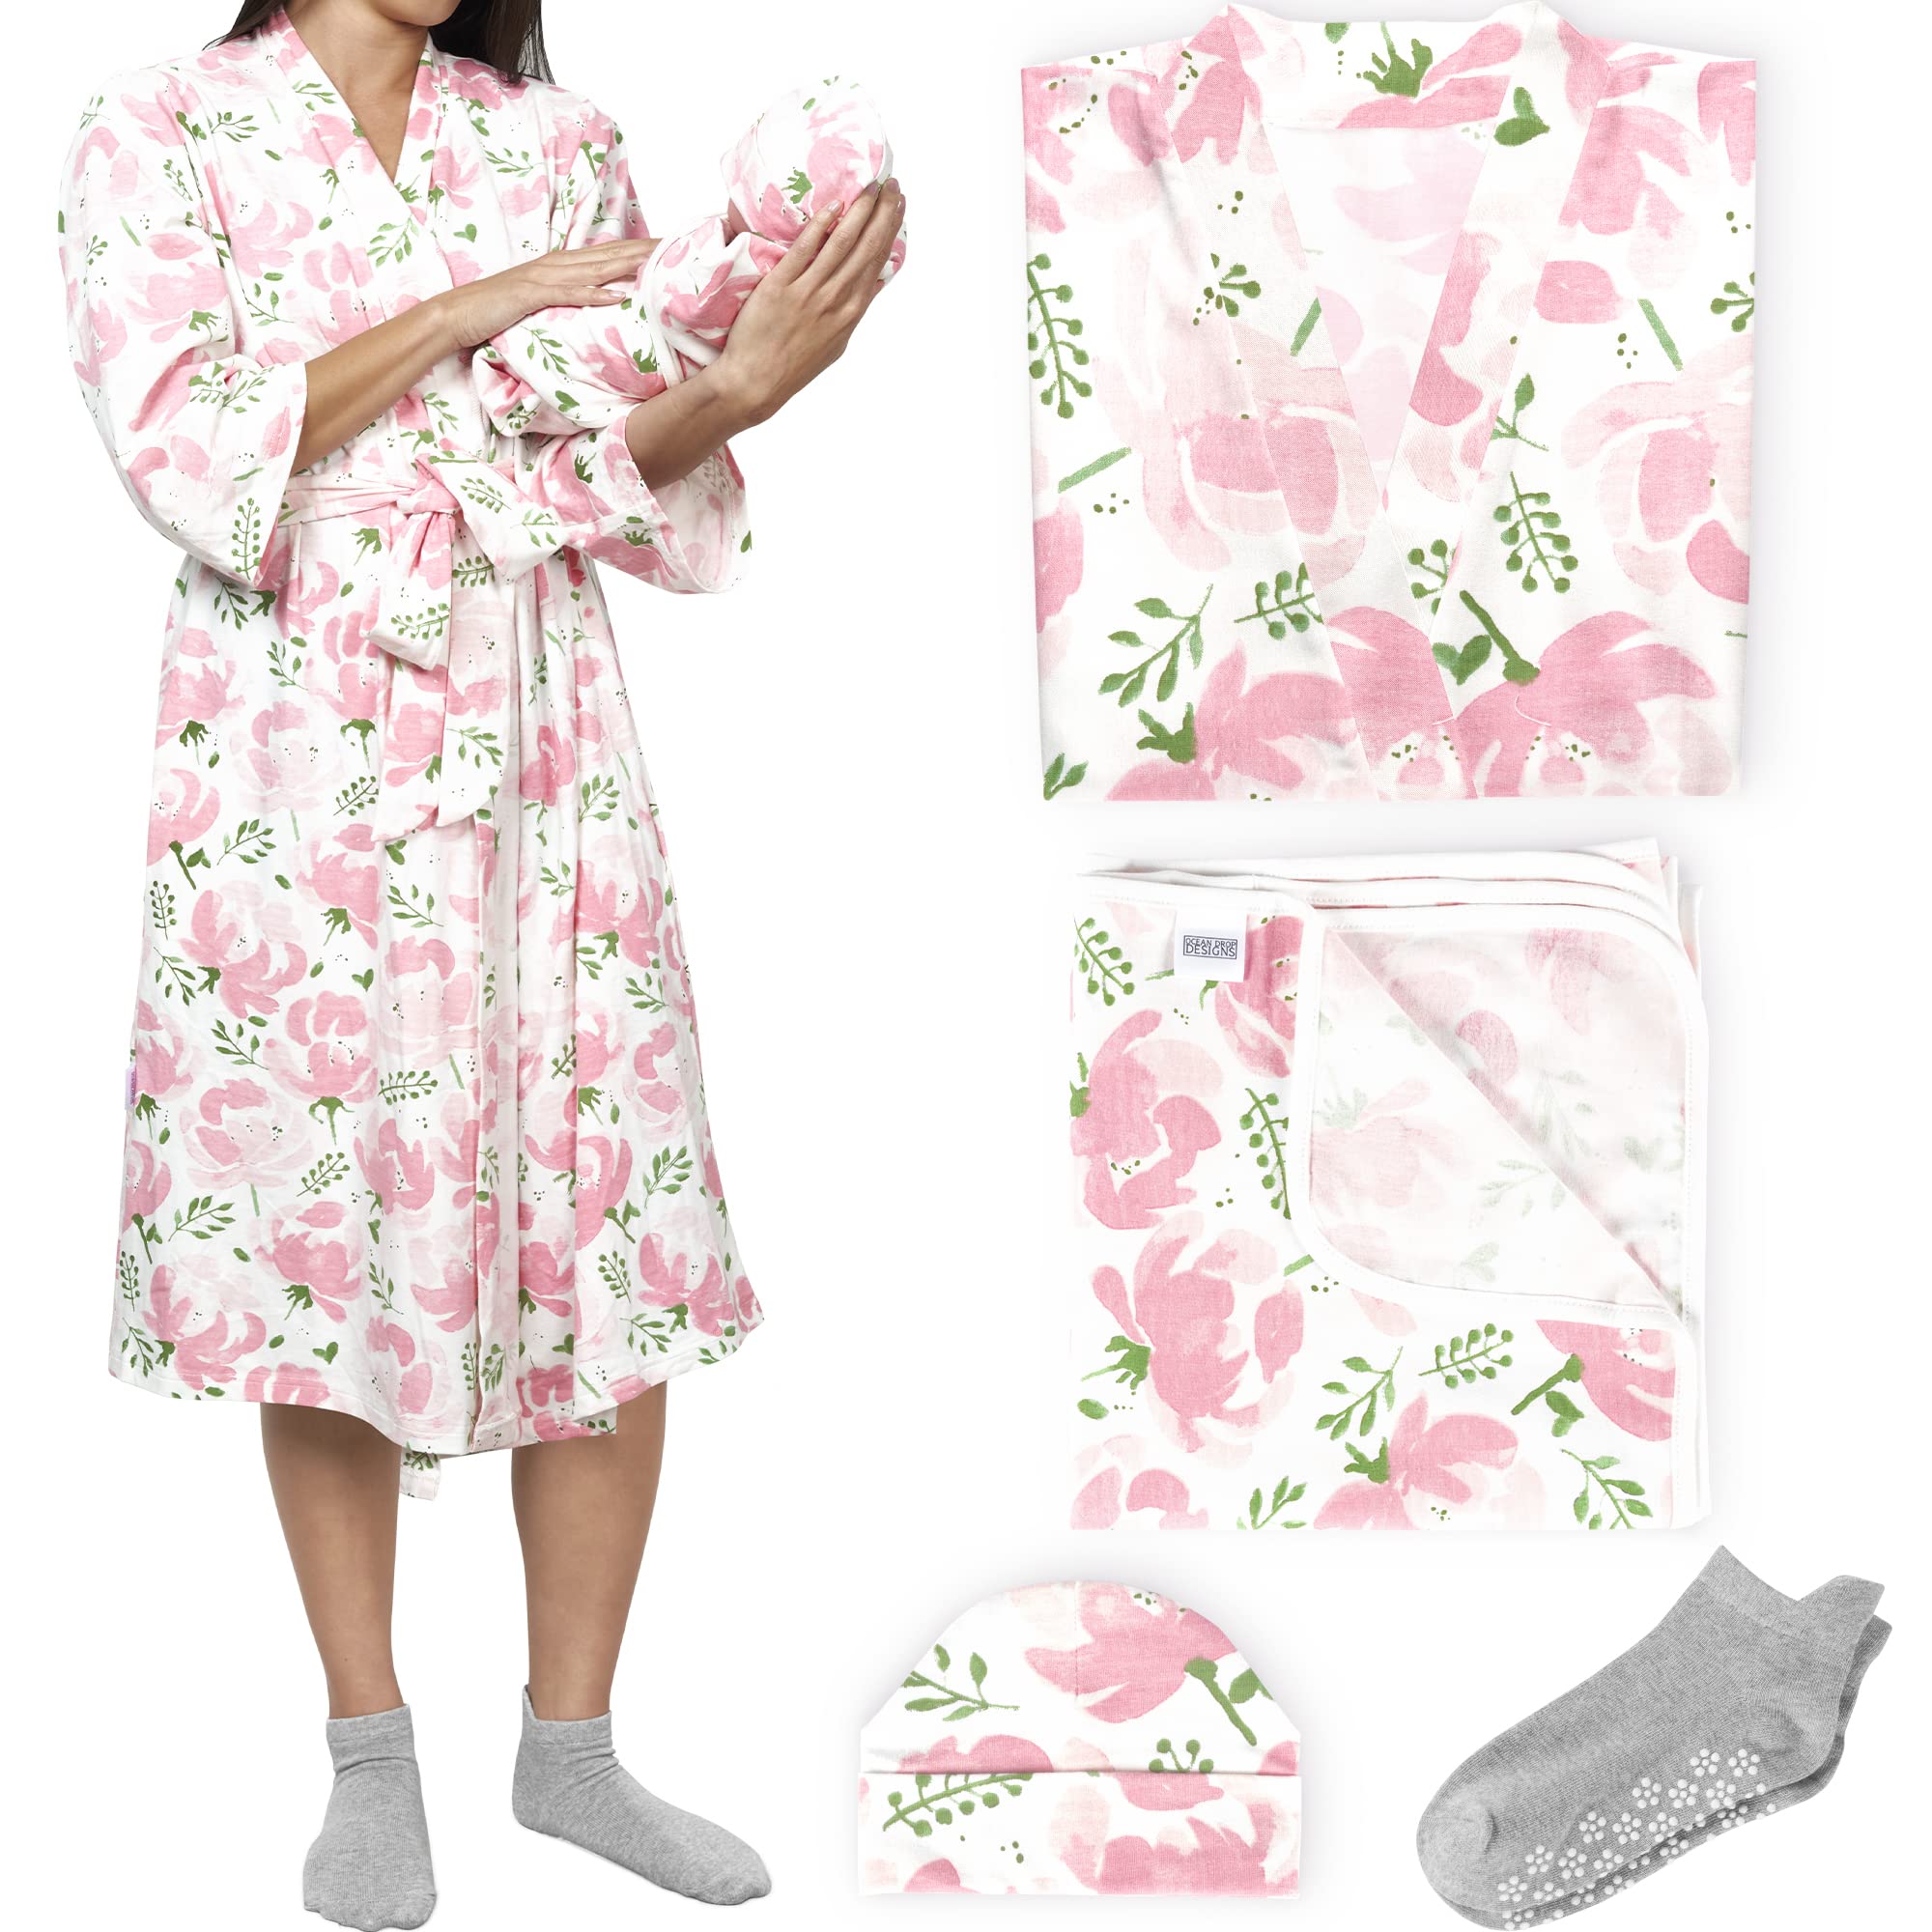 Rose Floral Labor & Delivery Hospital Gown with Matching Mom Robe